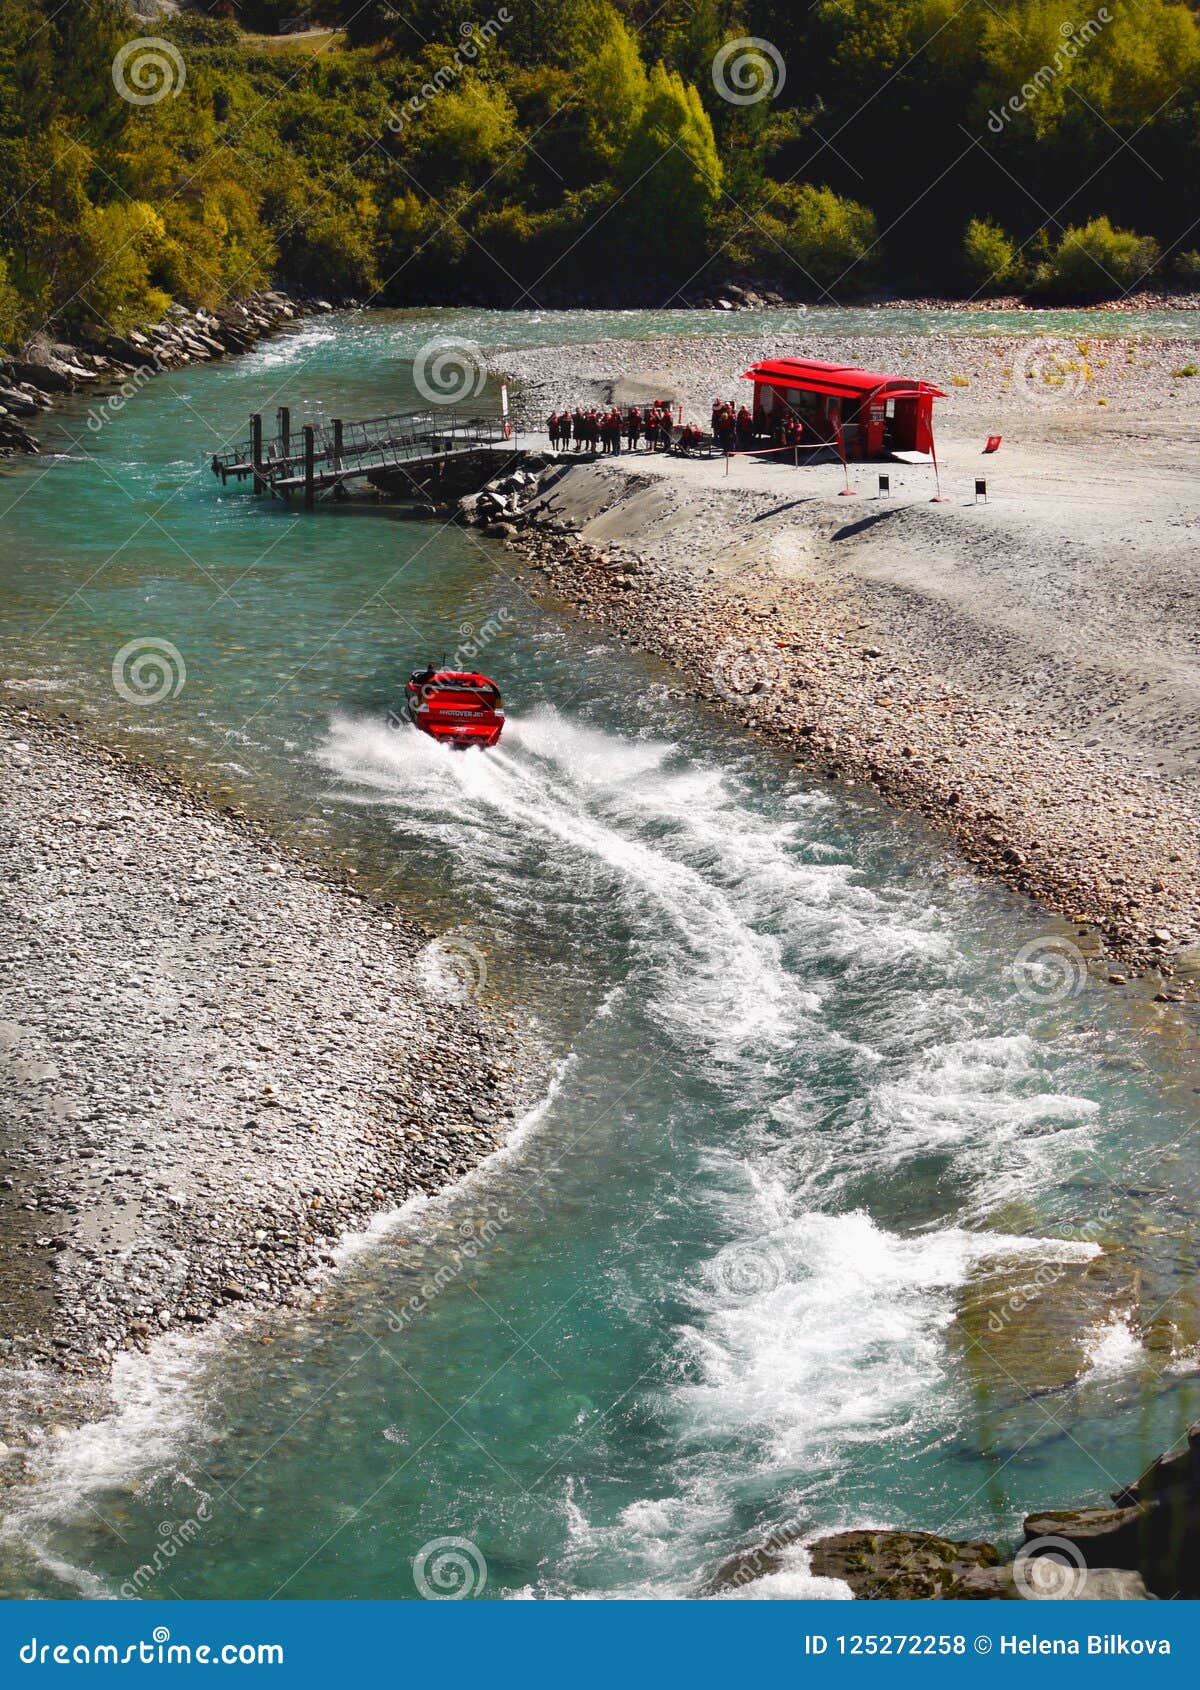 jet boat ride, new zealand editorial stock photo. image of